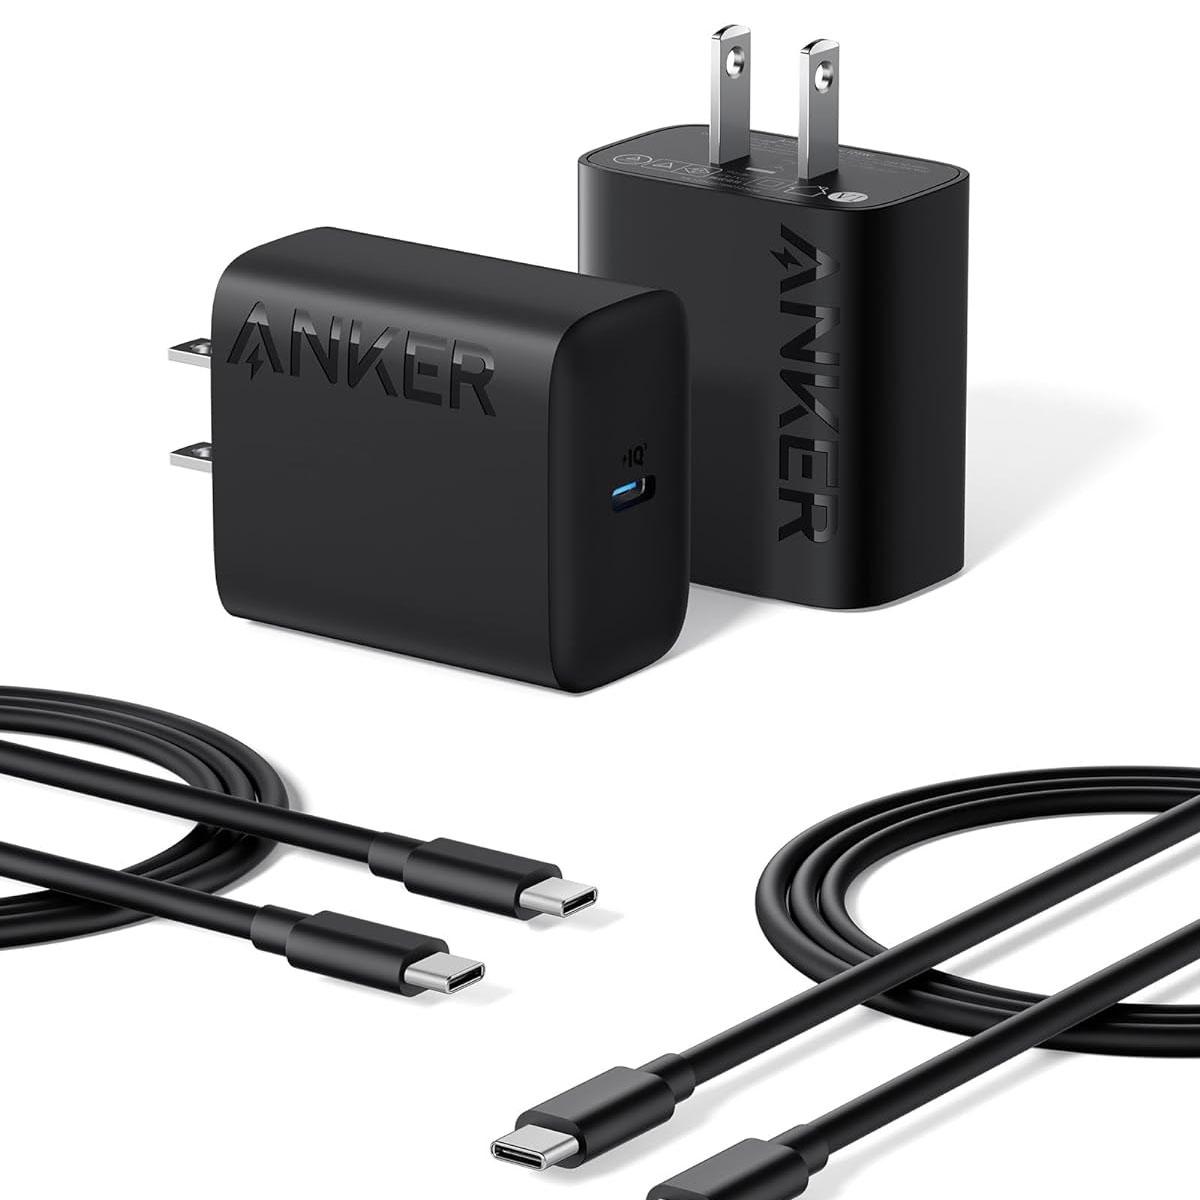 Anker 25W USB-C Super Fast Charger for $15.99